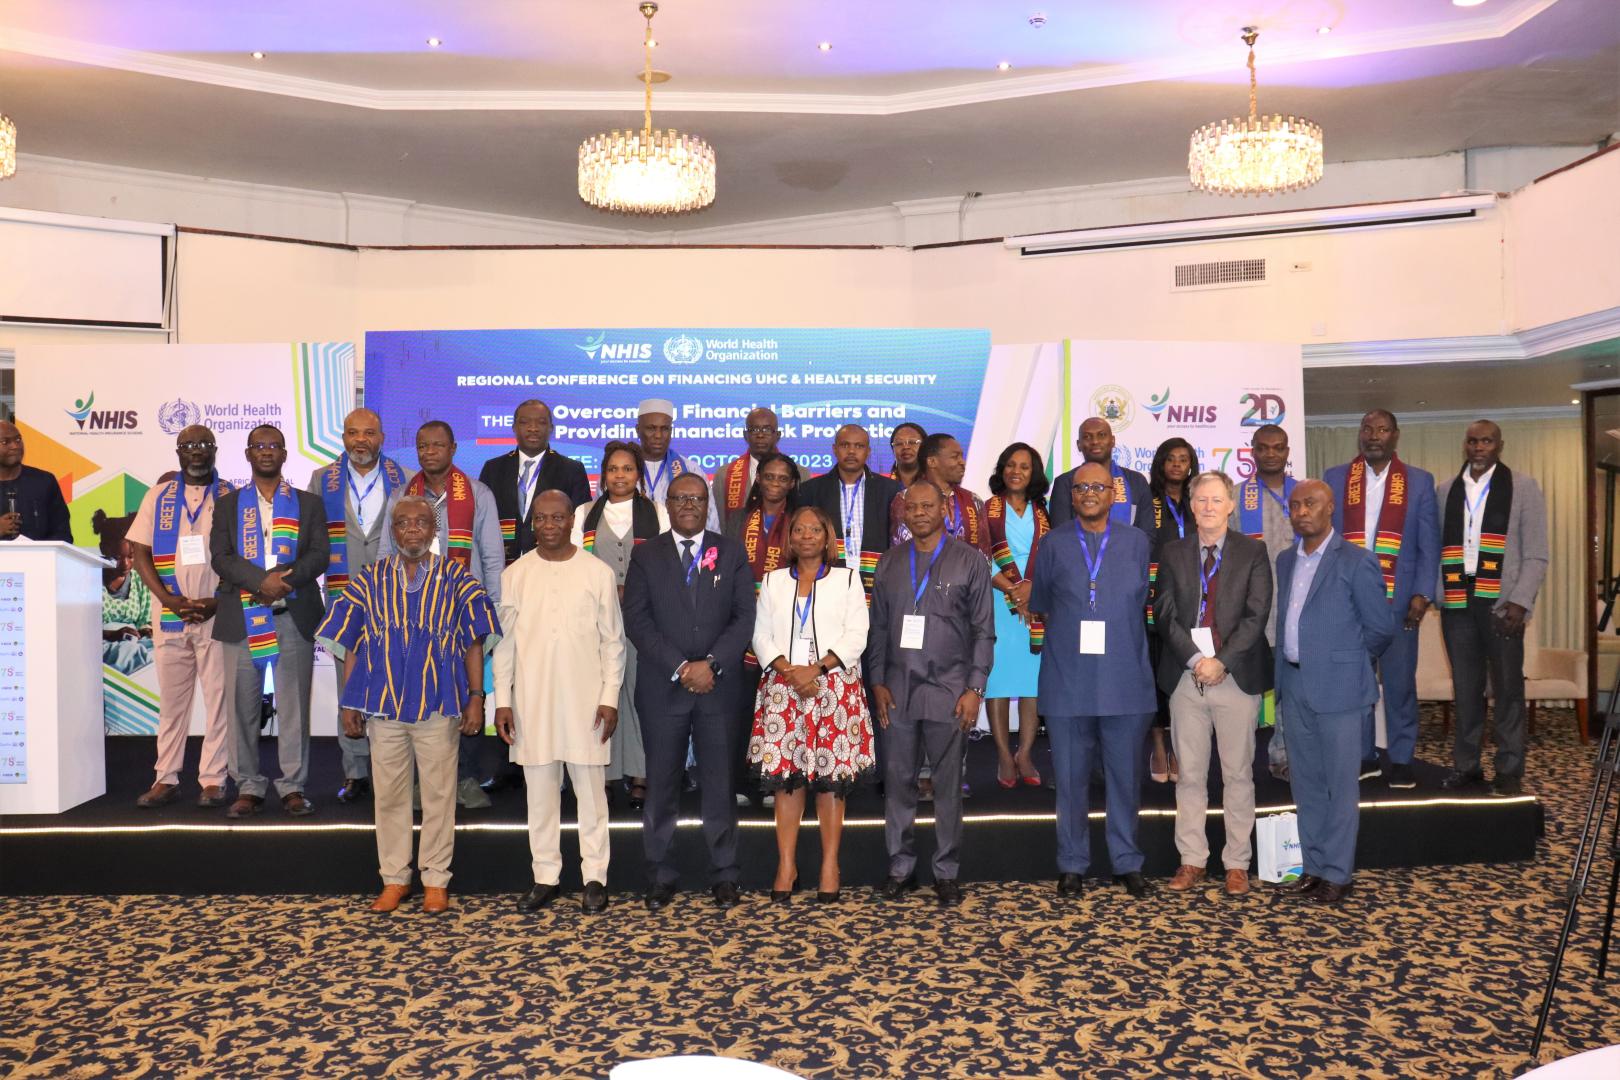 Africa regional conference on financing universal health coverage & health security held